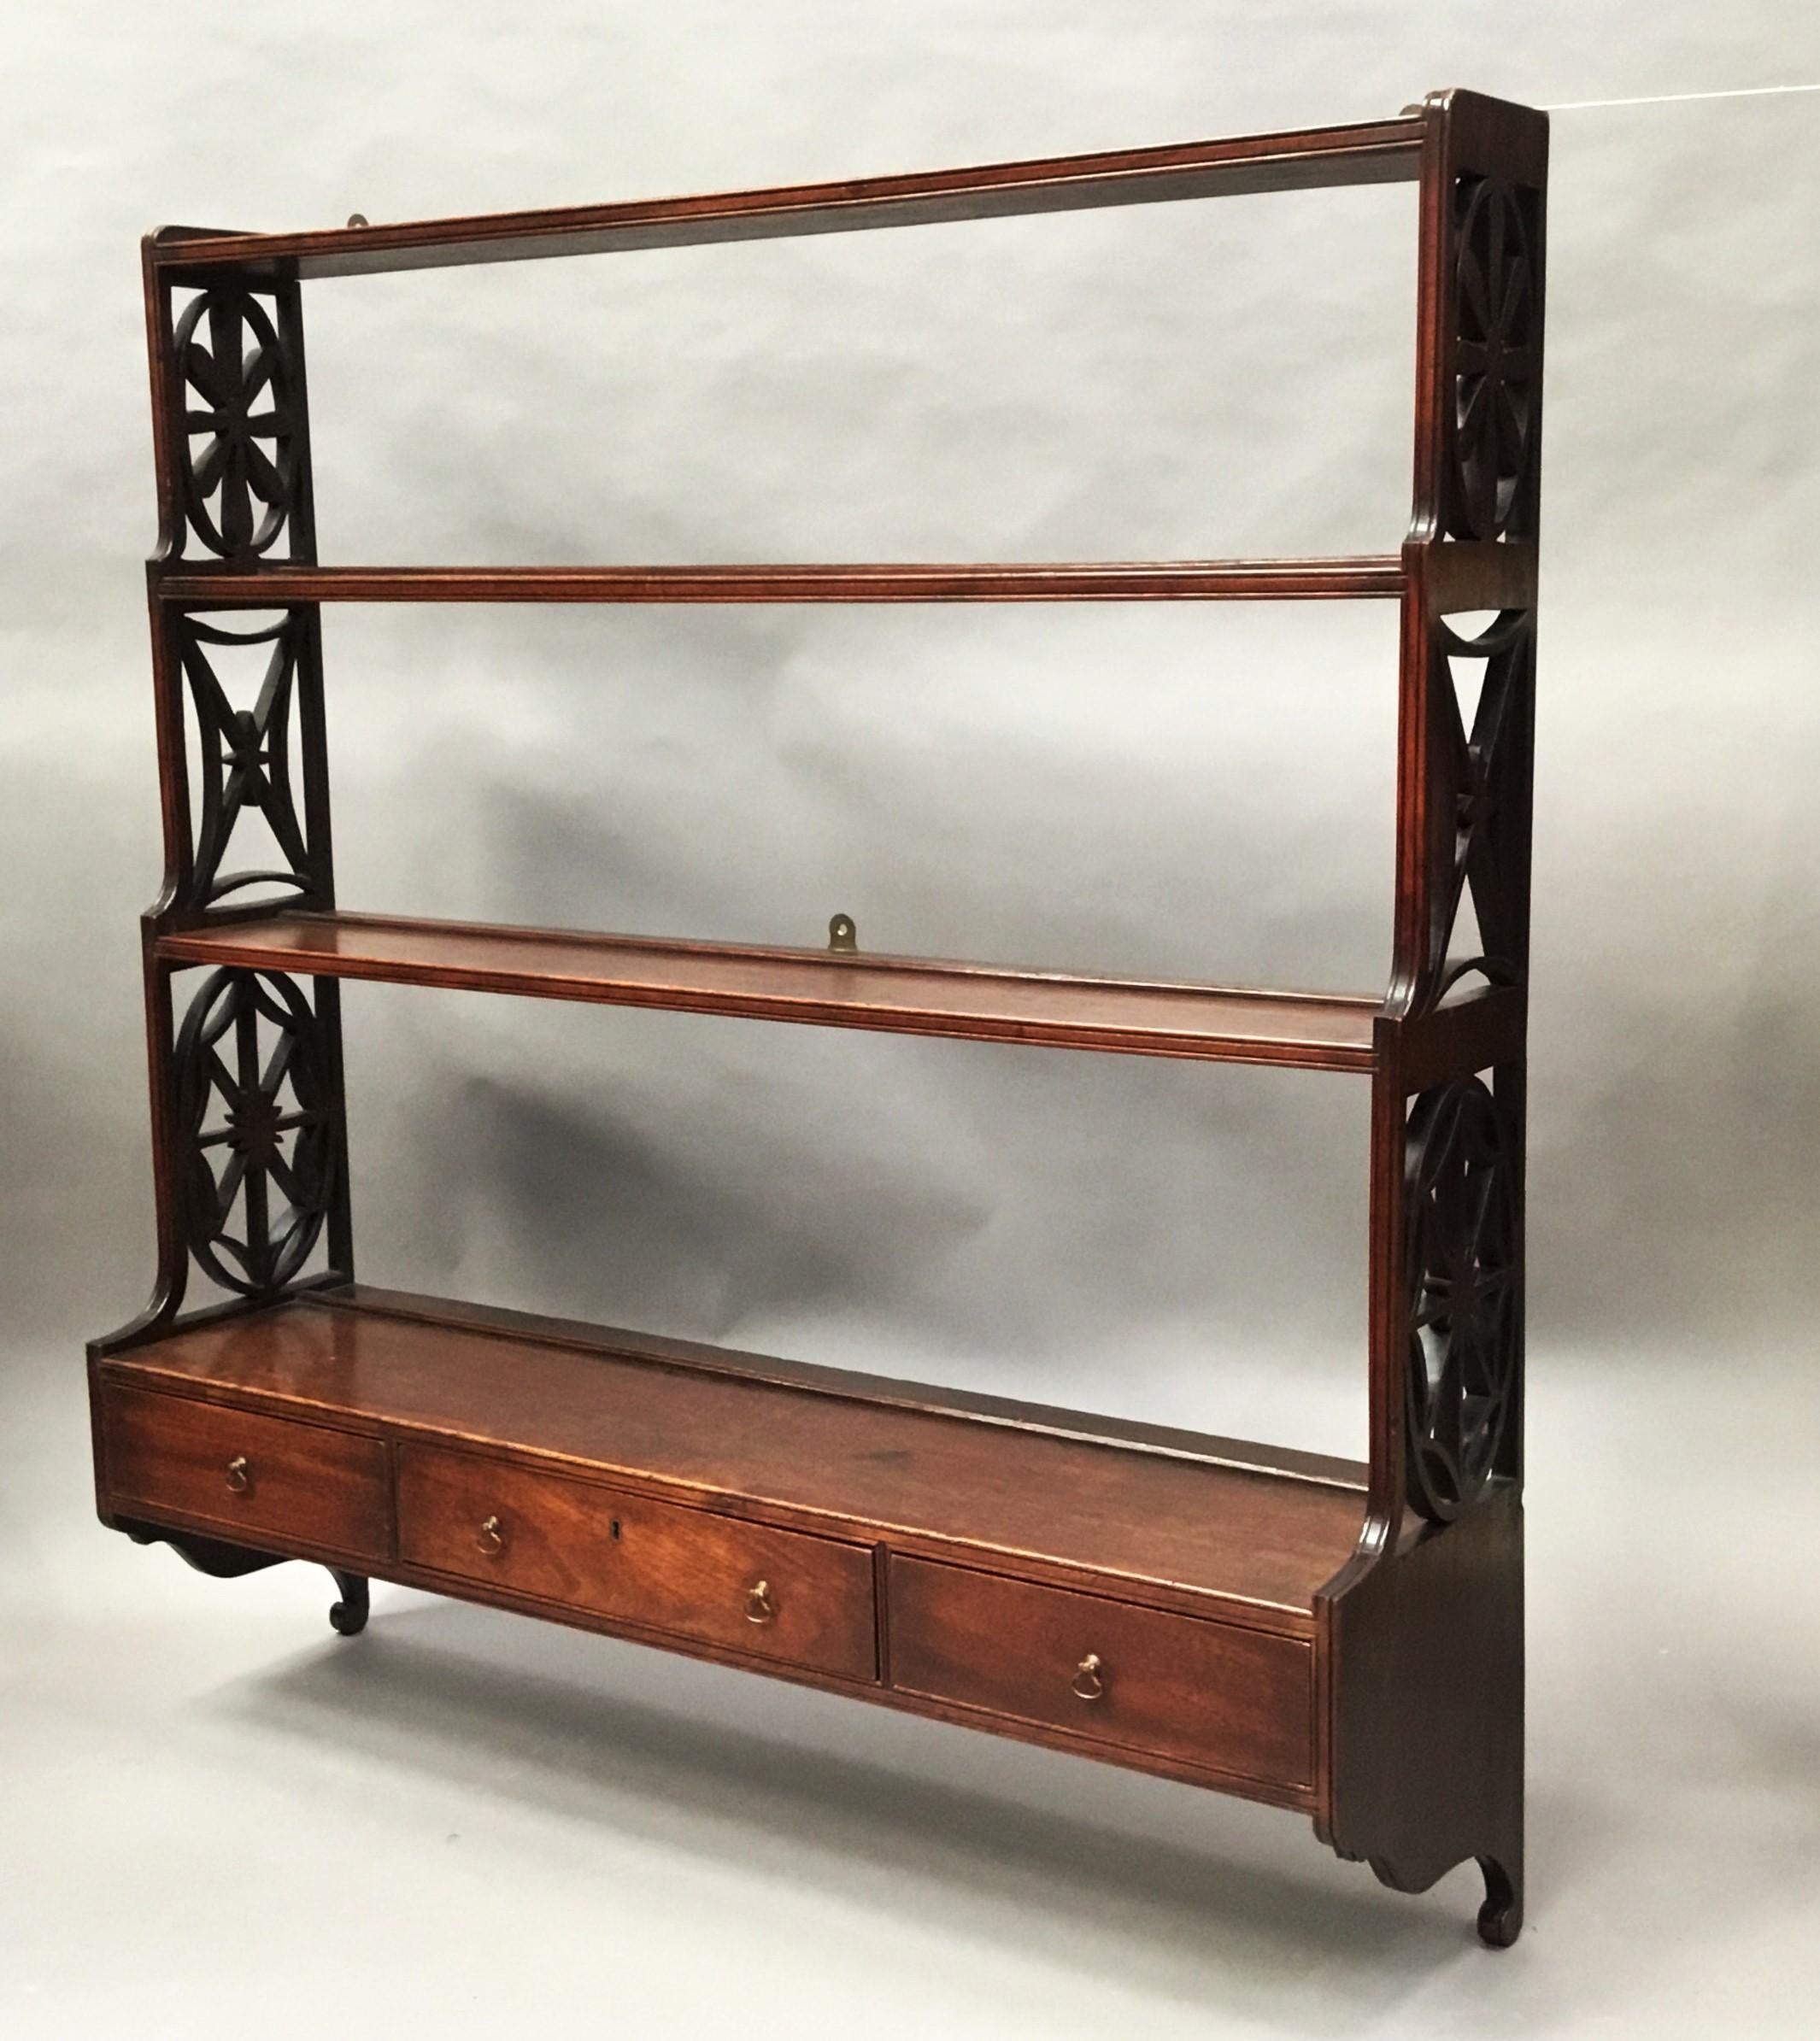 George III mahogany set of 'Chippendale' hanging wall shelves; of graduating form. The 4 graduating shelves supported on good carved open fret sides of 3 differing Chippendale inspired designs; and a scroll bracket below. The bottom shelf with 3